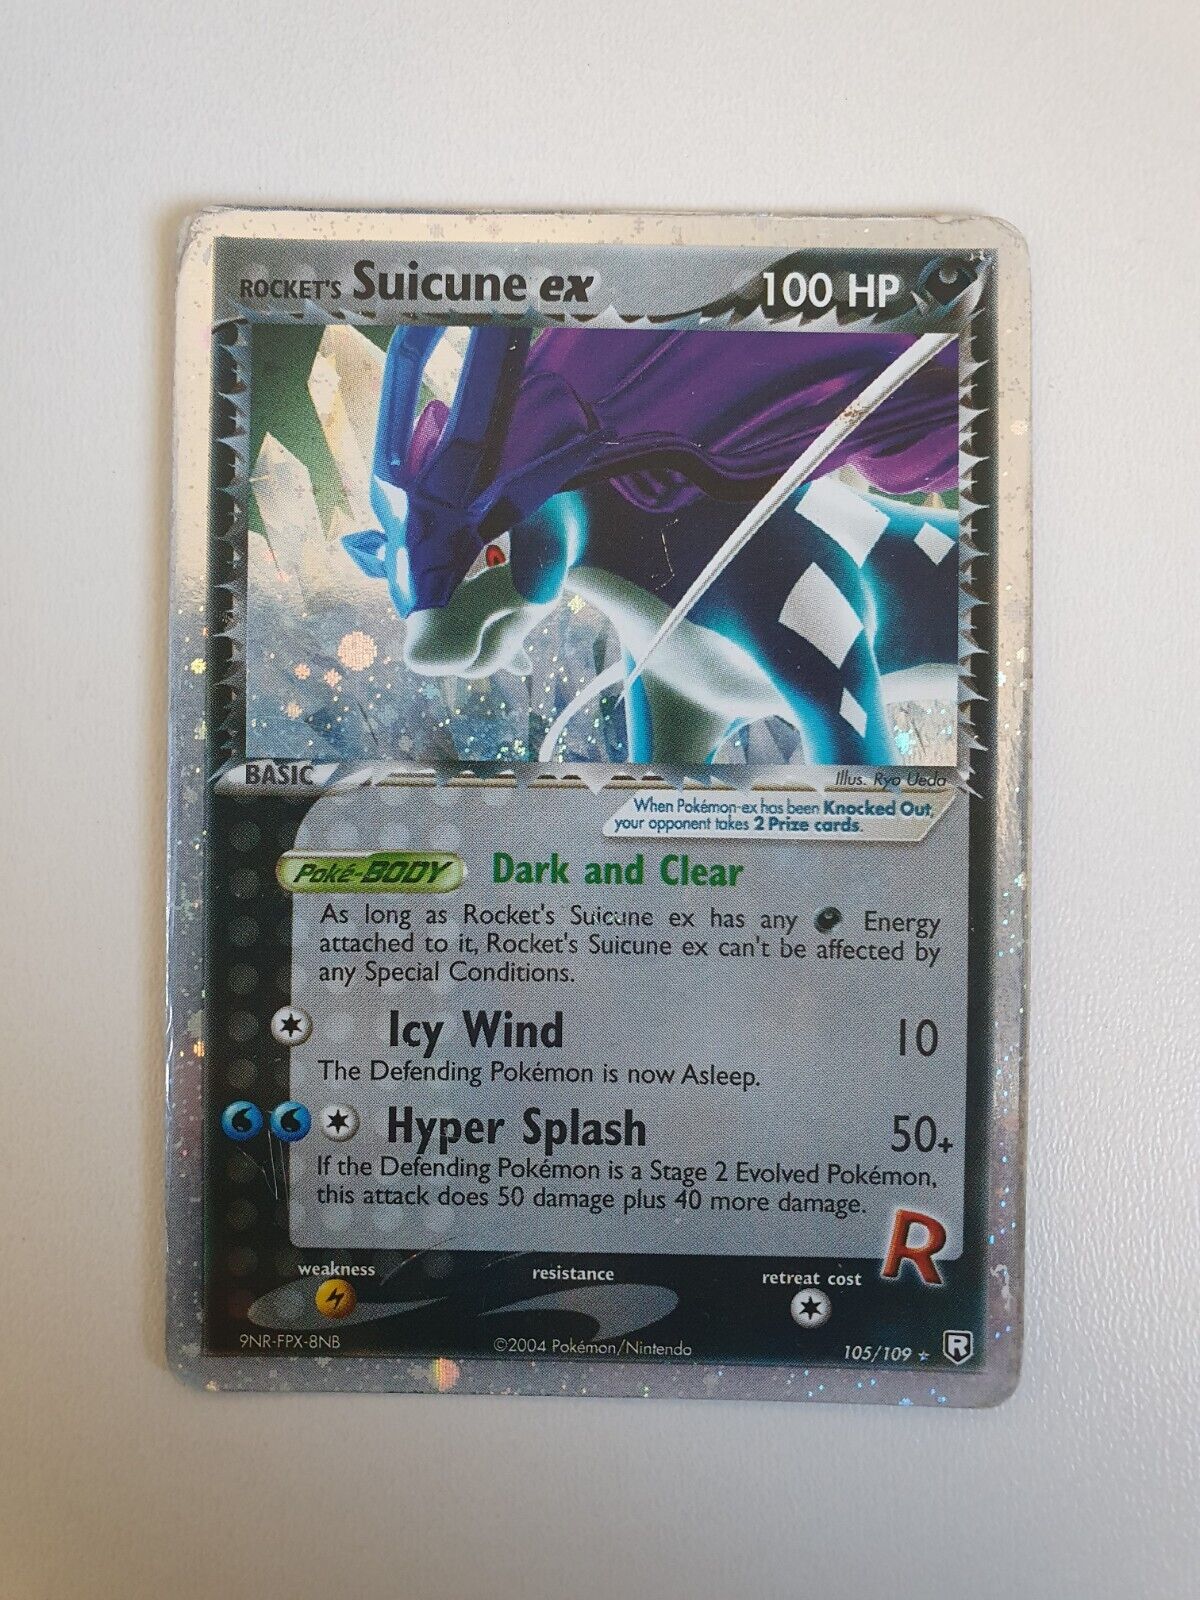 Pokemon Rocket’s Suicune EX 105/109 - Ultra Rare Holo Foil Card - Moderate Play